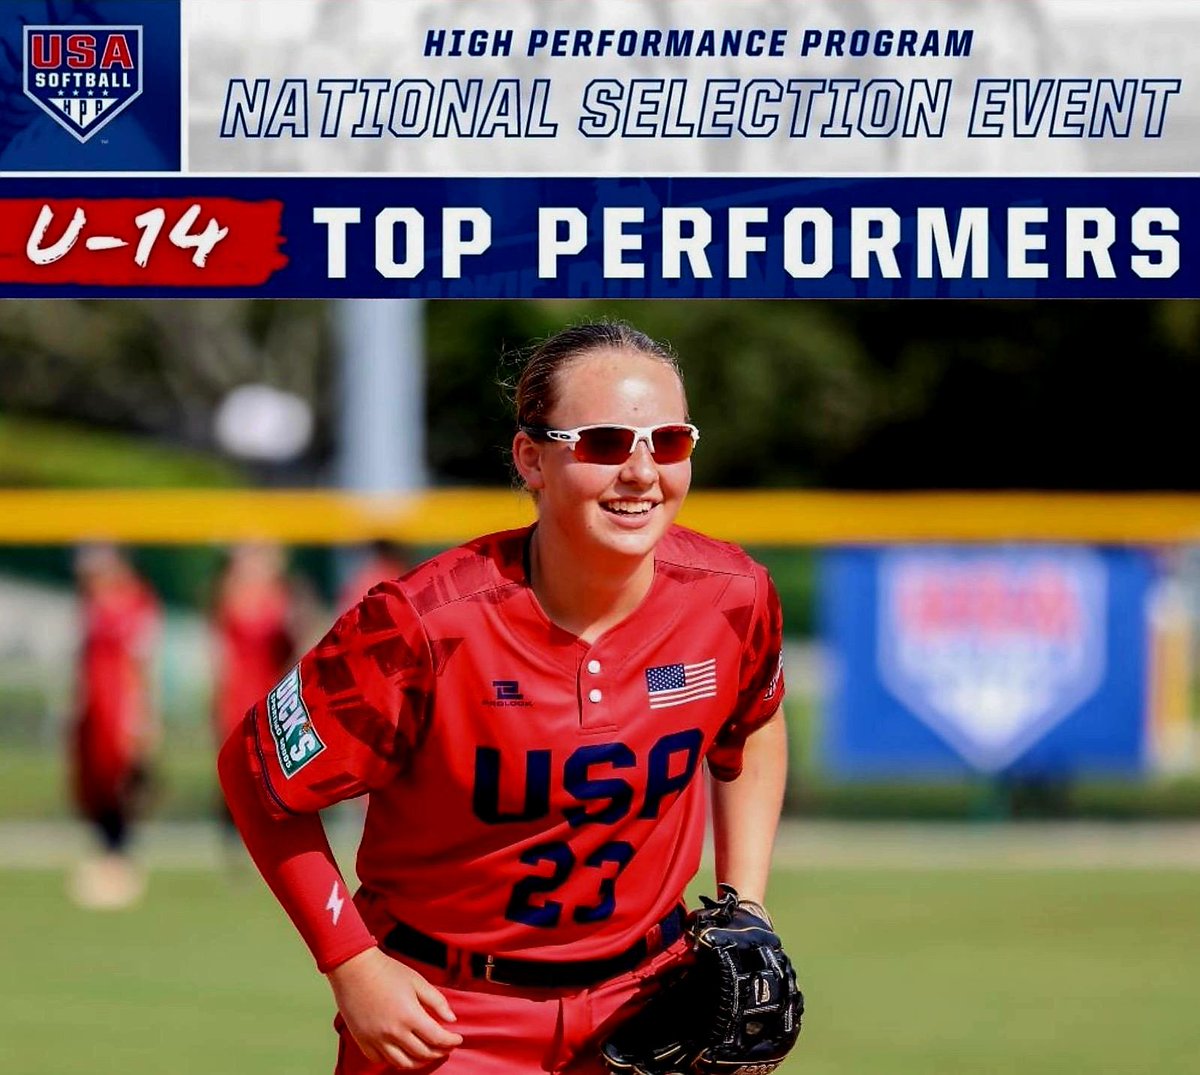 Honored to have been selected as a U-14 top performer at the HPP National Selection Event. Thank you @USASoftball for the recognition!